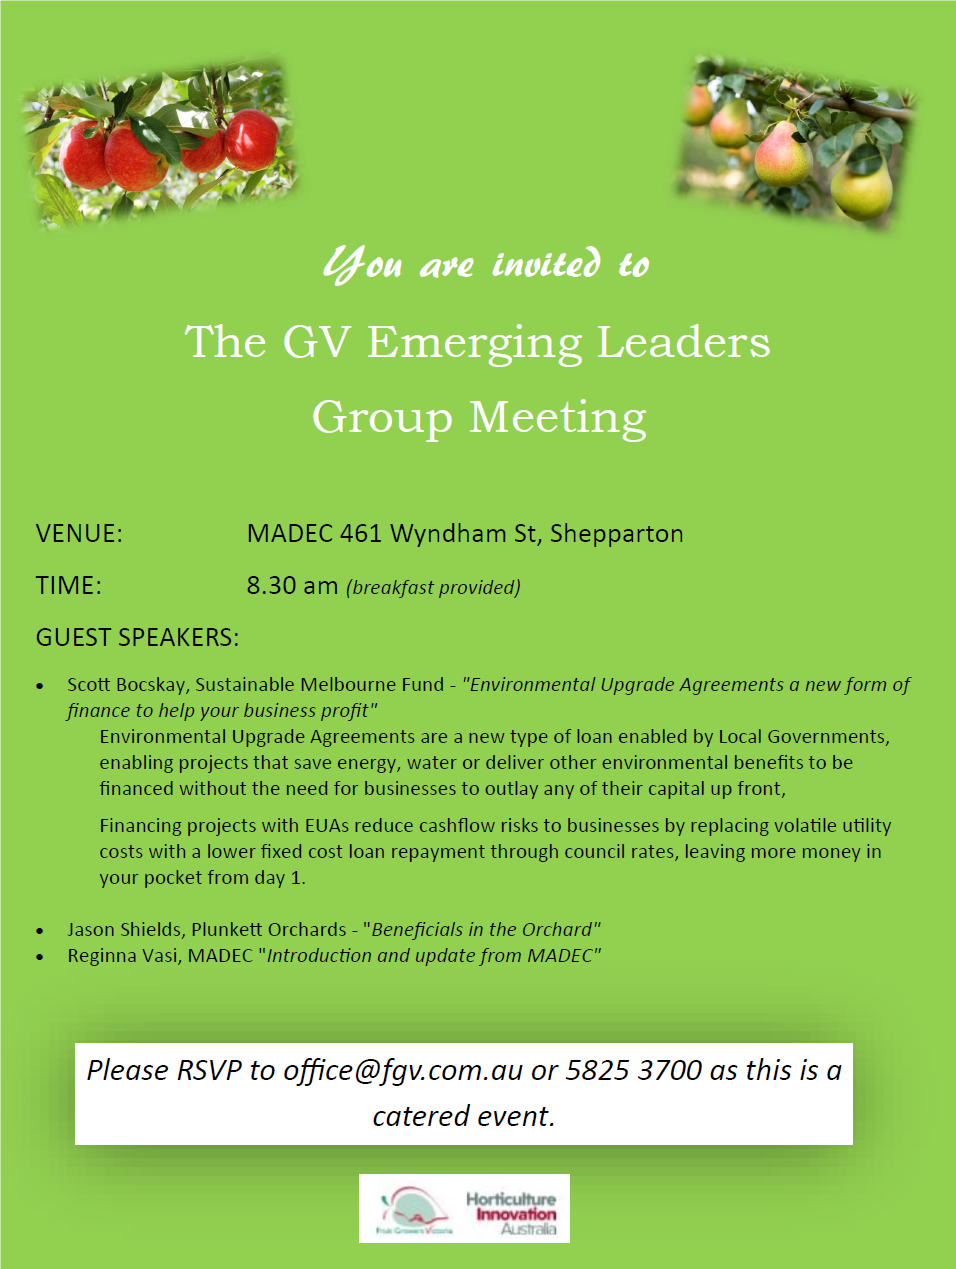 GV Emerging Leaders Group meeting on 07 Dec at MADEC Offices 8.30am